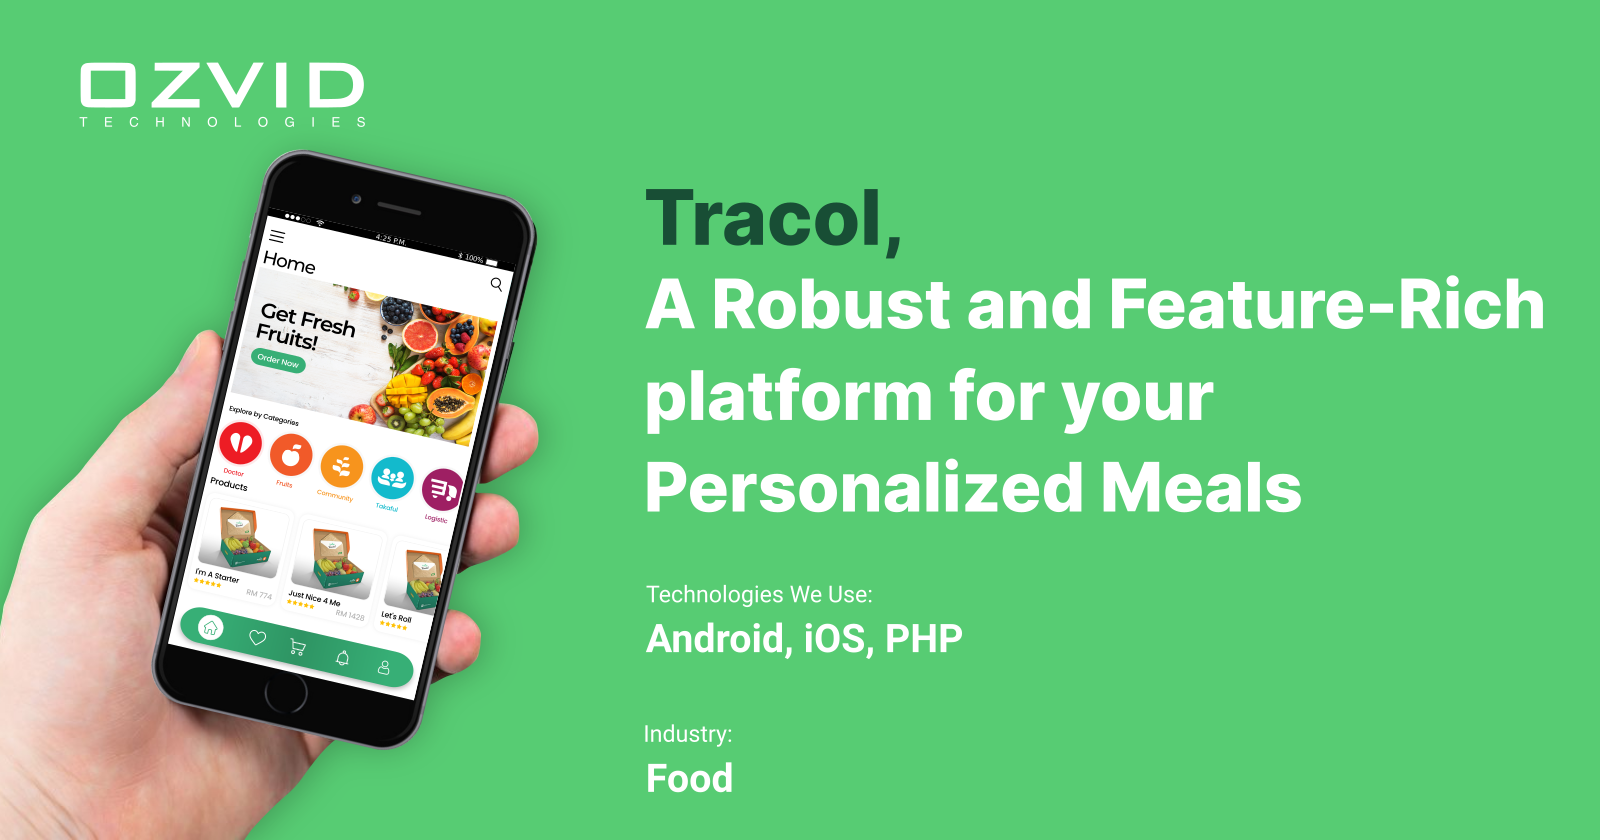 Tracol, a Robust and Feature-rich Platform for your Personalized Meals